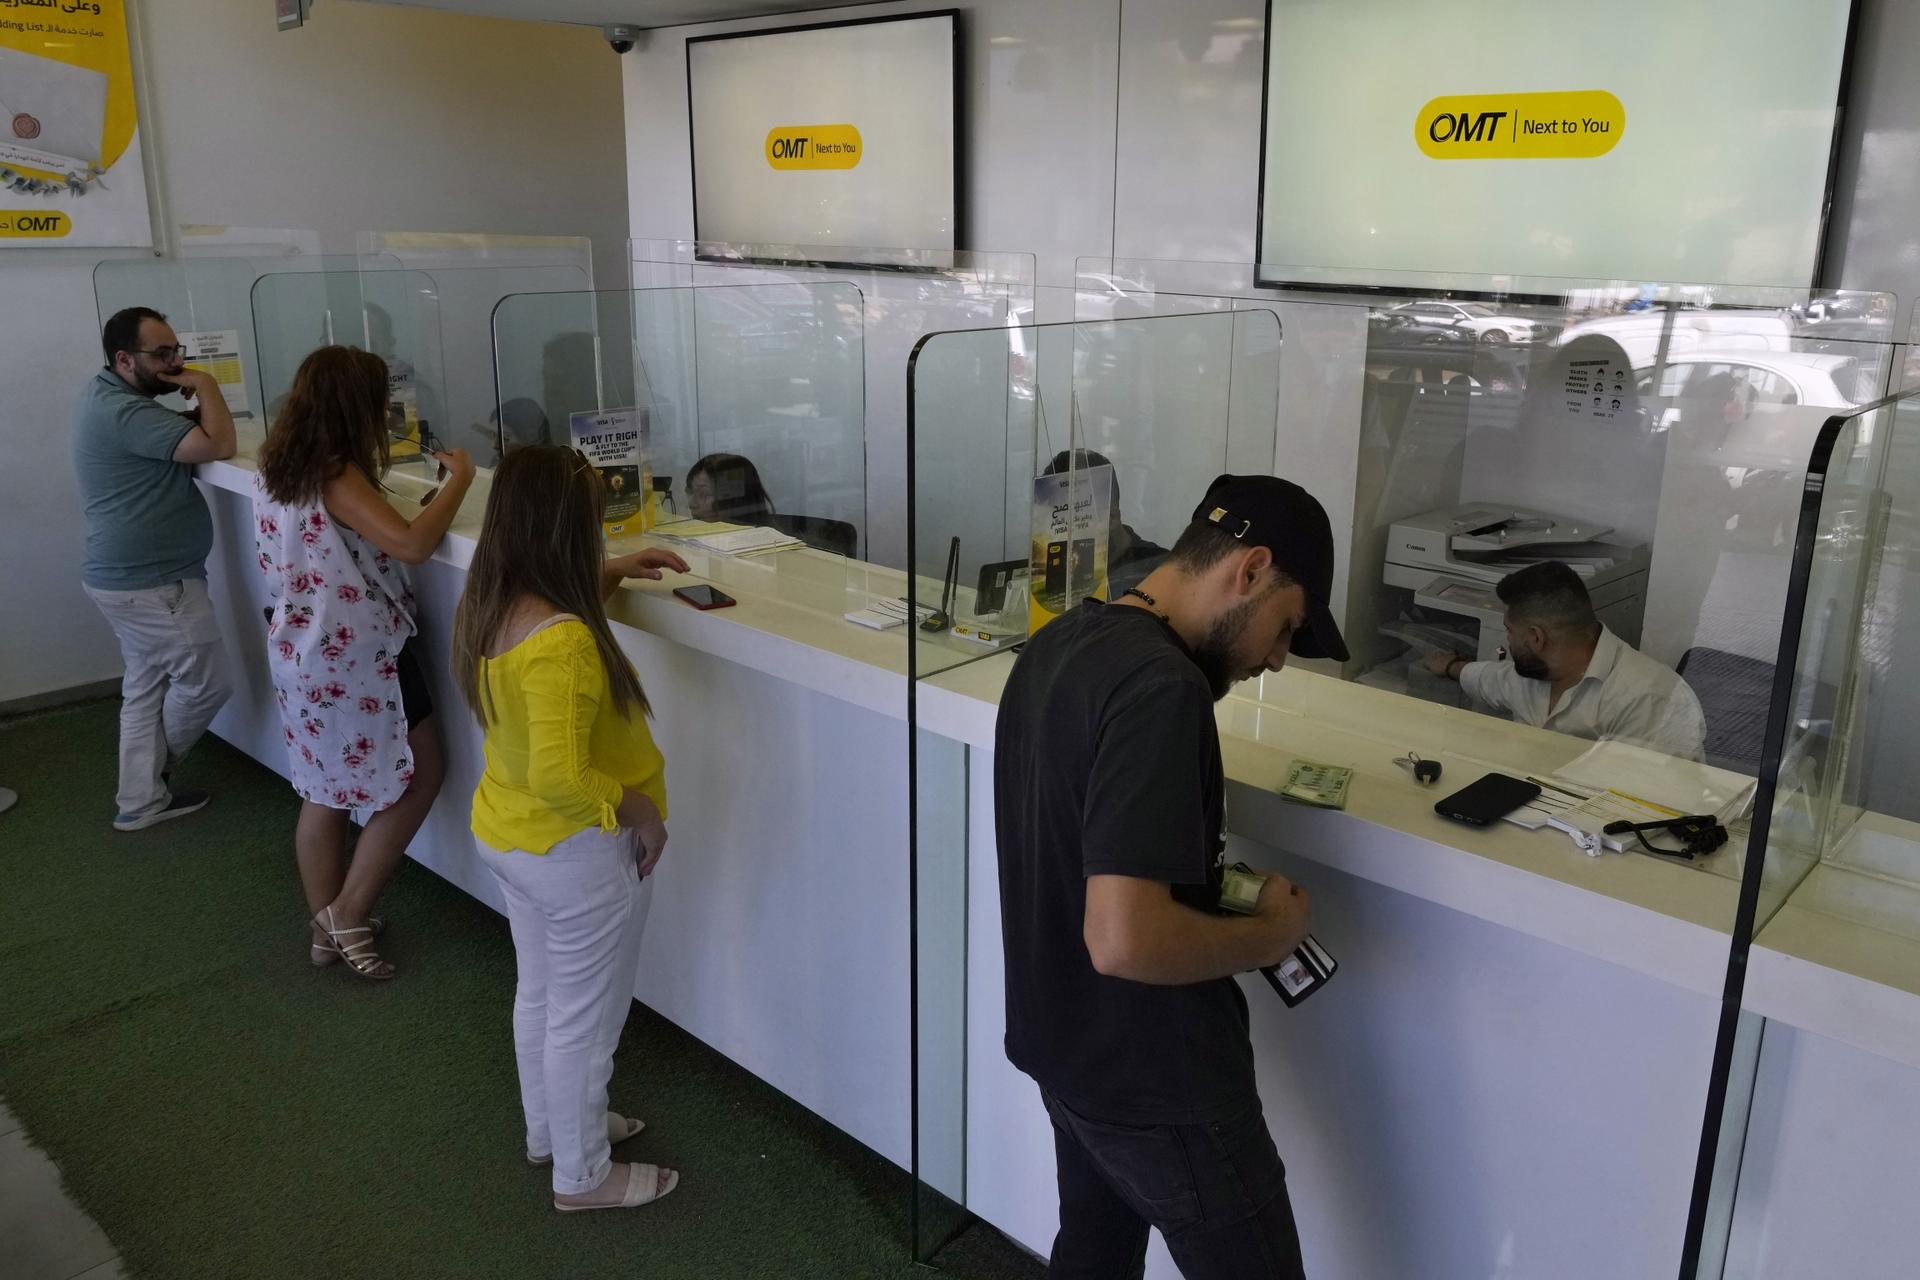 People stand inside the money transfer offices of Western Union and OMT in Beirut, Lebanon